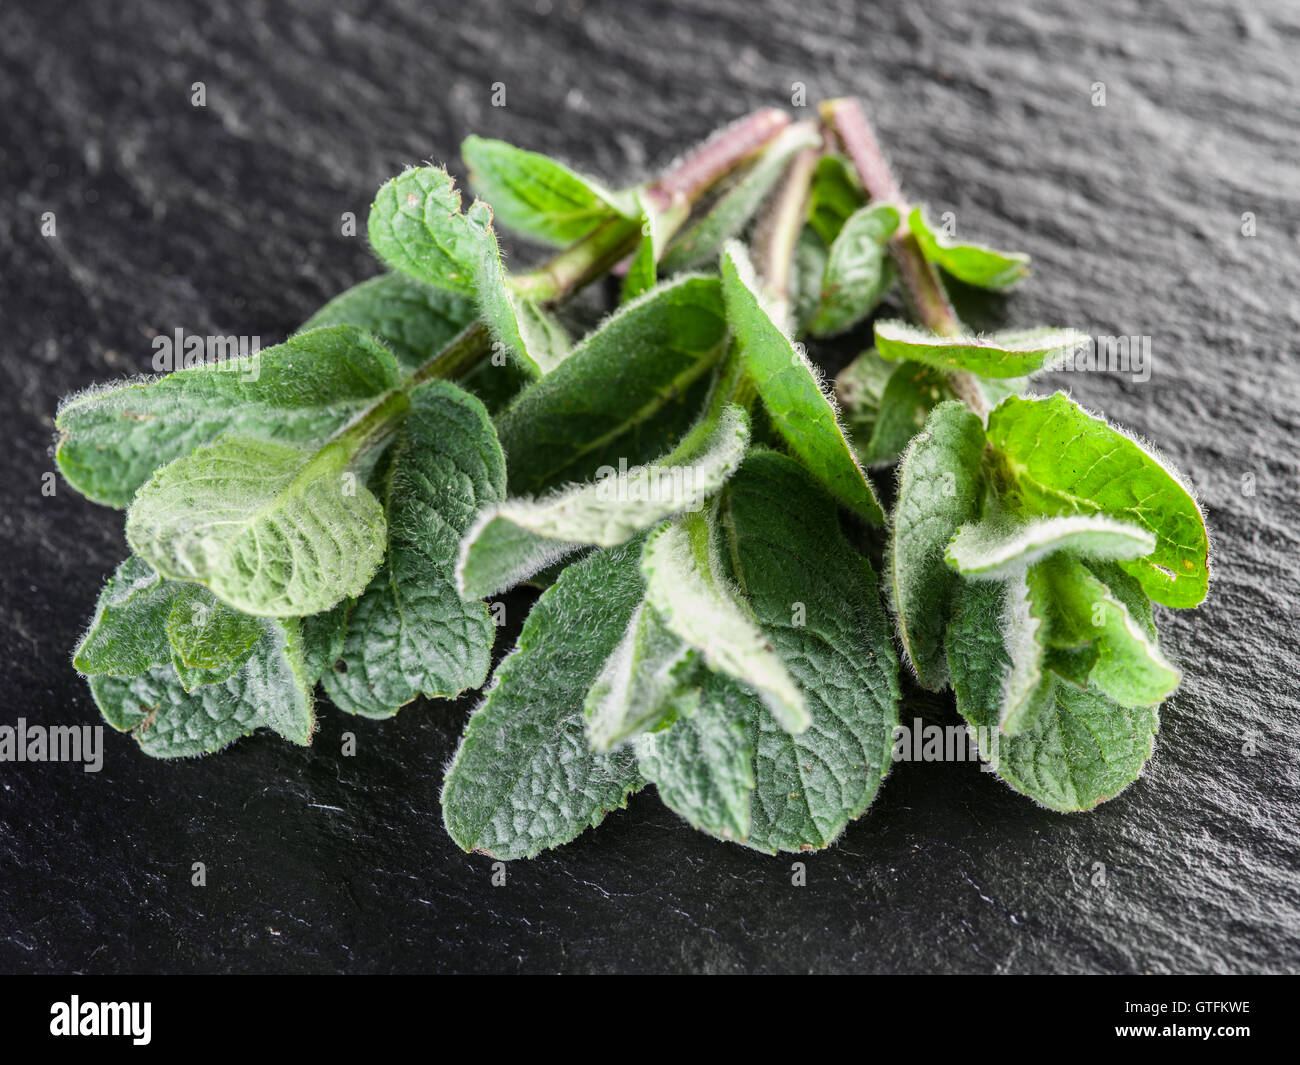 Mint herb on the black graphite board. Stock Photo